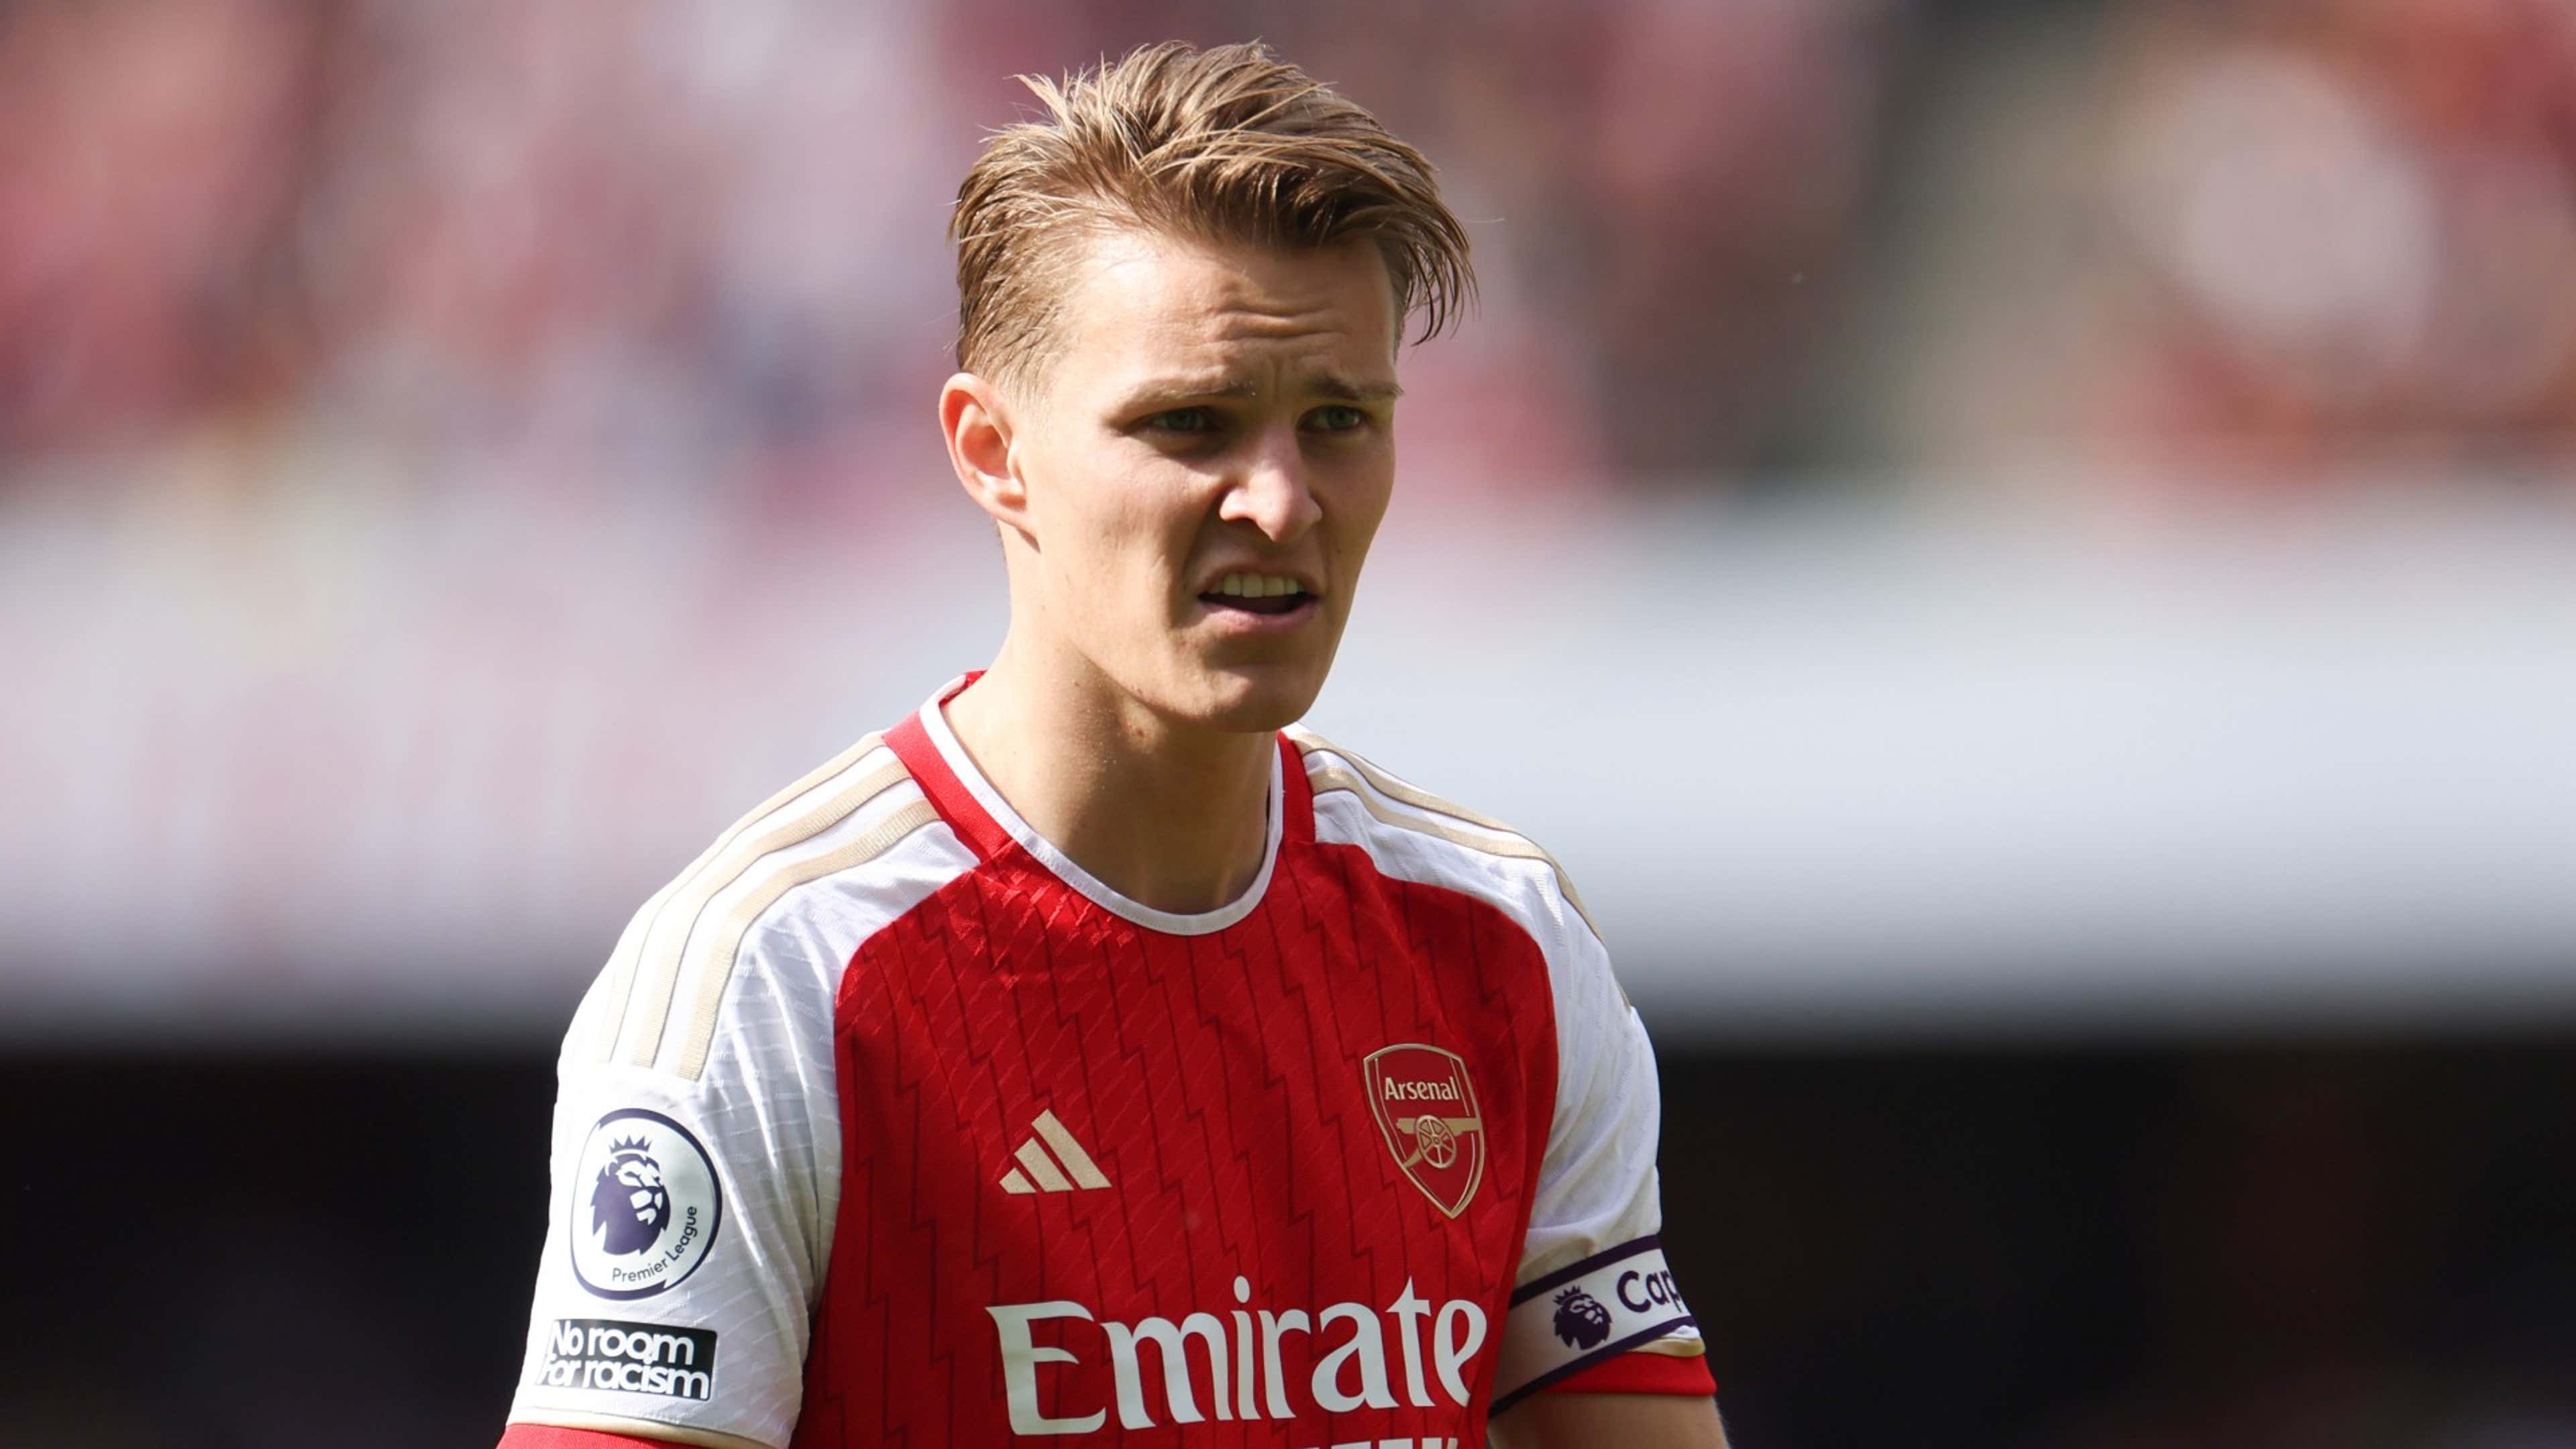  Martin Odegaard of Arsenal لكرة القدم  looks on during the Premier League match between Arsenal and Leeds United at Emirates Stadium on May 08, 2022 in London, United Kingdom.